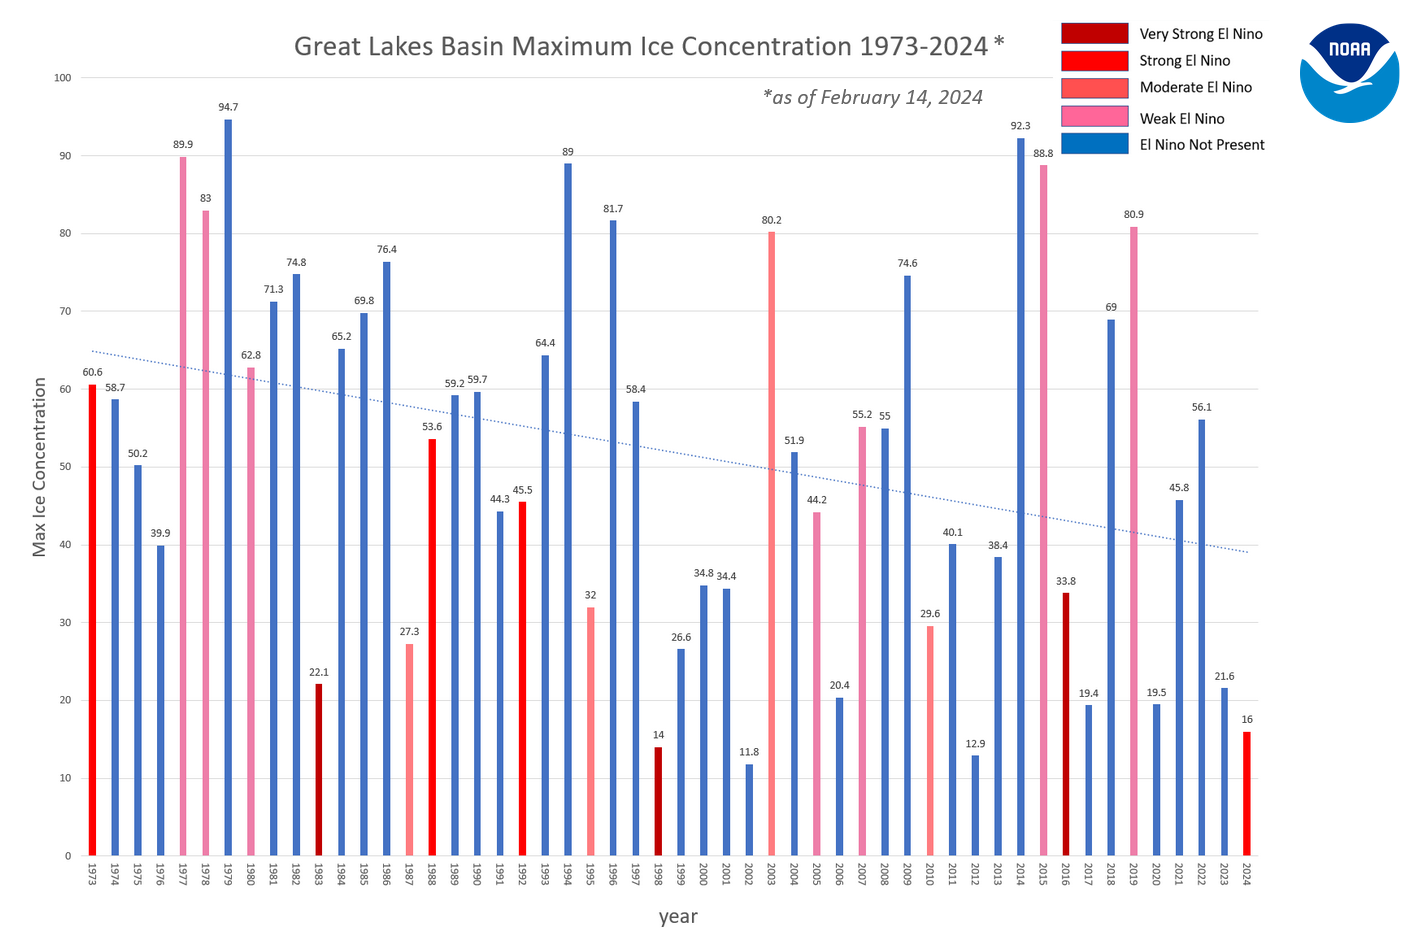 Color-coded chart showing maximum annual ice cover percentage on the Great Lakes from 1973-2024. Bar colors indicate El Niño strength for each year, ranging from "very strong El Niño" to "El Niño not present"